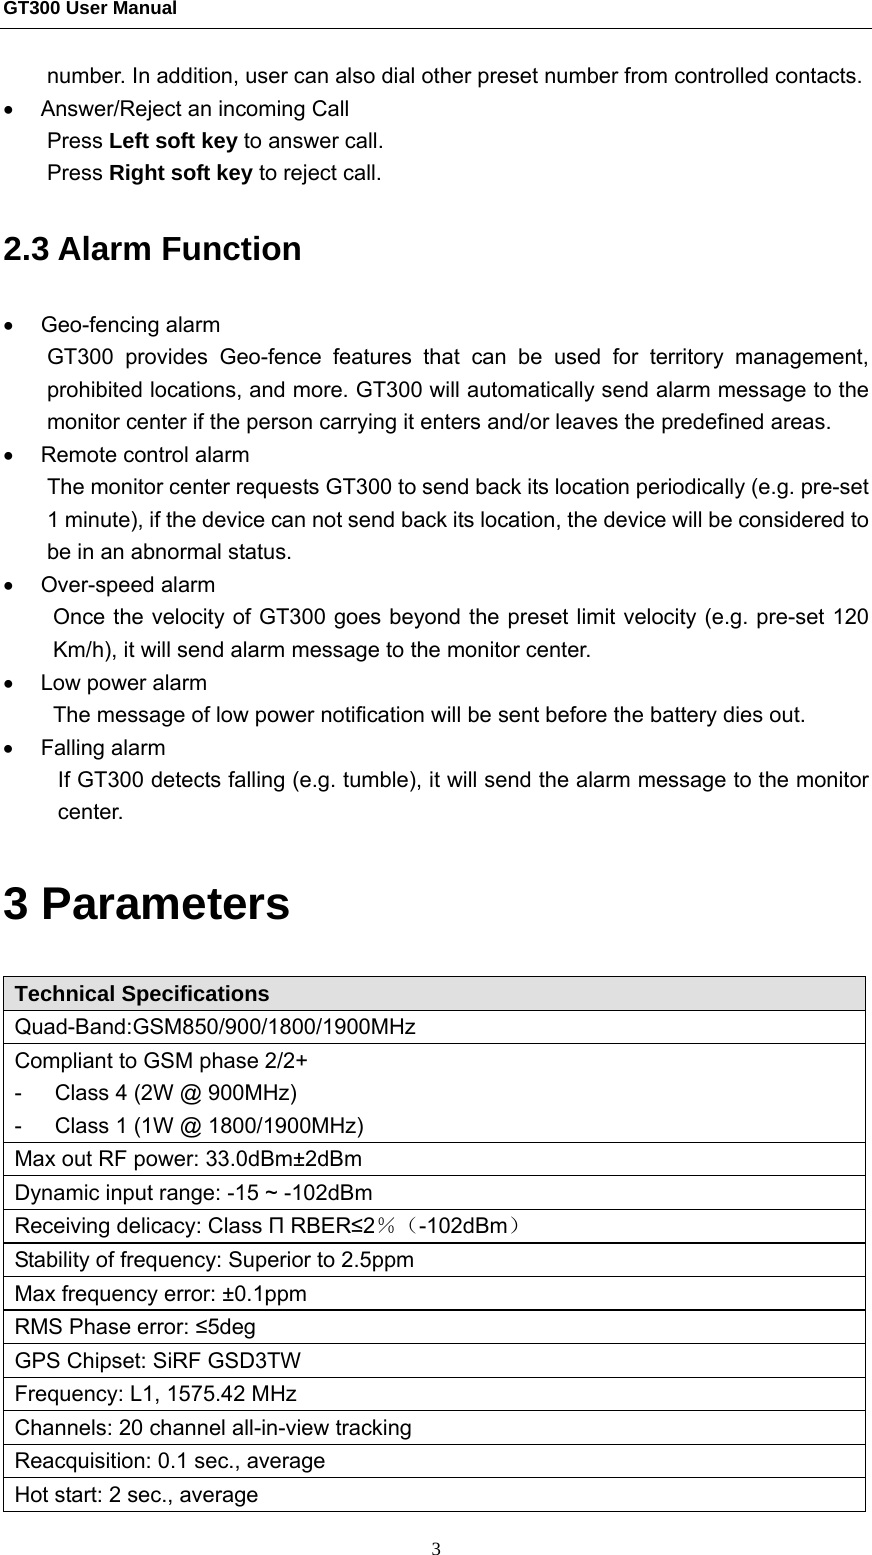 GT300 User Manual                                                  3 number. In addition, user can also dial other preset number from controlled contacts. •  Answer/Reject an incoming Call Press Left soft key to answer call. Press Right soft key to reject call. 2.3 Alarm Function   • Geo-fencing alarm GT300 provides Geo-fence features that can be used for territory management, prohibited locations, and more. GT300 will automatically send alarm message to the monitor center if the person carrying it enters and/or leaves the predefined areas. •  Remote control alarm The monitor center requests GT300 to send back its location periodically (e.g. pre-set 1 minute), if the device can not send back its location, the device will be considered to be in an abnormal status. • Over-speed alarm Once the velocity of GT300 goes beyond the preset limit velocity (e.g. pre-set 120 Km/h), it will send alarm message to the monitor center. •  Low power alarm The message of low power notification will be sent before the battery dies out. • Falling alarm  If GT300 detects falling (e.g. tumble), it will send the alarm message to the monitor center. 3 Parameters   Technical Specifications   Quad-Band:GSM850/900/1800/1900MHz Compliant to GSM phase 2/2+ -      Class 4 (2W @ 900MHz) -      Class 1 (1W @ 1800/1900MHz) Max out RF power: 33.0dBm±2dBm Dynamic input range: -15 ~ -102dBm Receiving delicacy: Class П RBER≤2％（-102dBm） Stability of frequency: Superior to 2.5ppm Max frequency error: ±0.1ppm RMS Phase error: ≤5deg GPS Chipset: SiRF GSD3TW Frequency: L1, 1575.42 MHz Channels: 20 channel all-in-view tracking Reacquisition: 0.1 sec., average  Hot start: 2 sec., average 